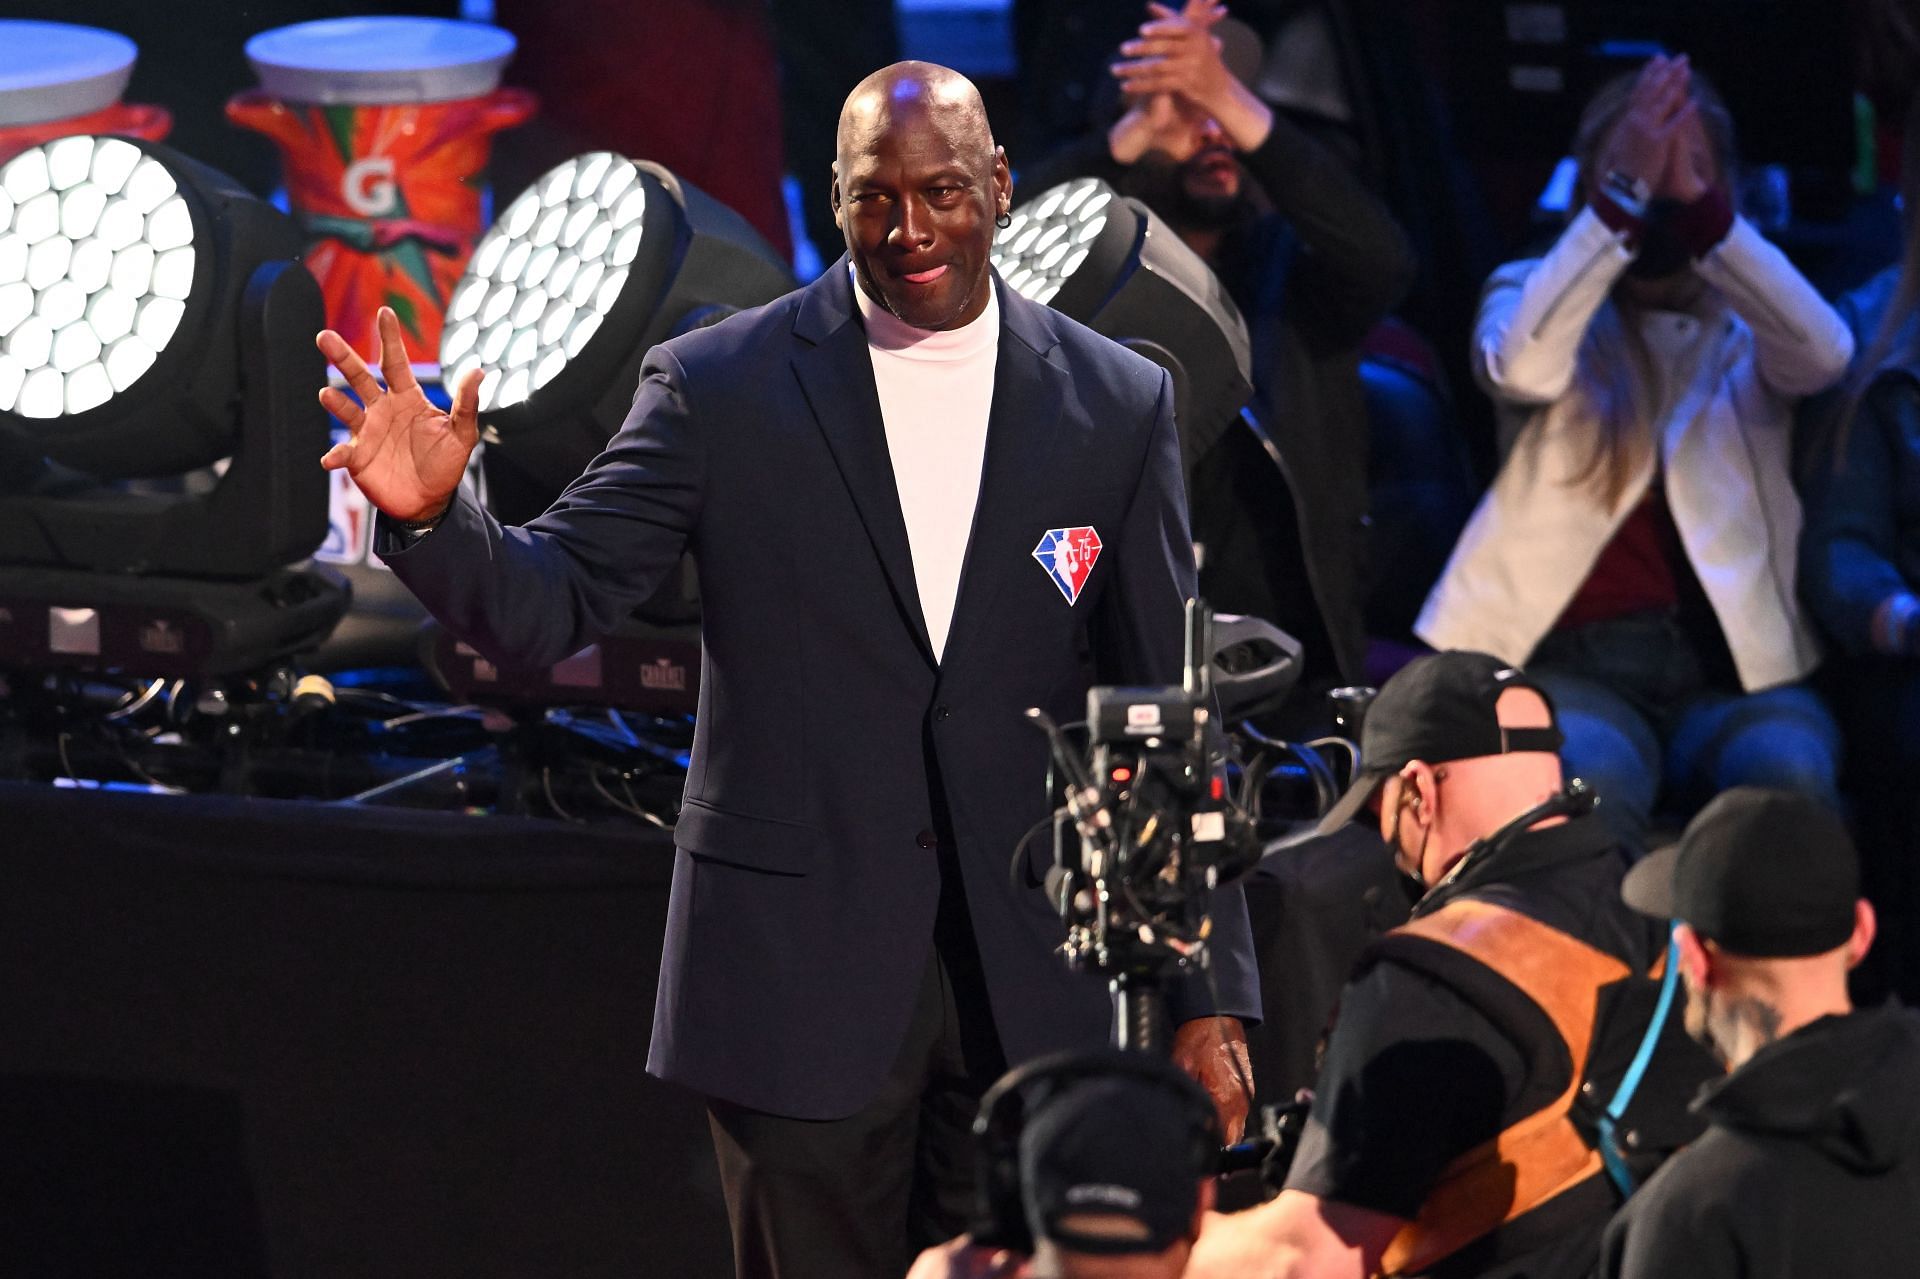 2022 NBA All-Star Game; Michael Jordan celebrating after being introduced to the NBA All-Time 75 list